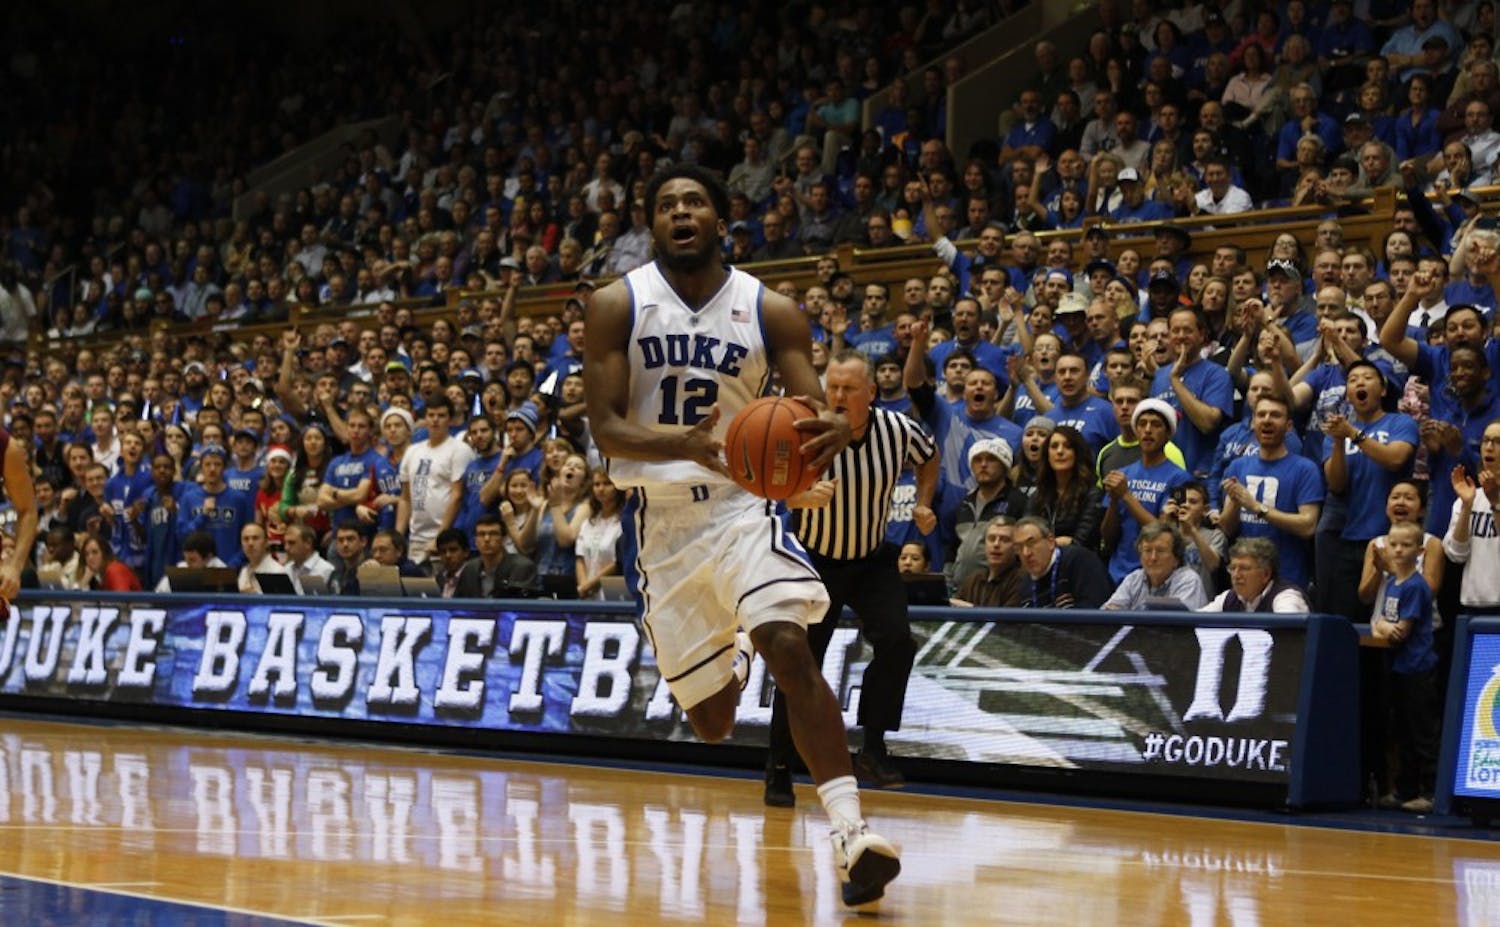 Freshman Justise Winslow got the crowd into the game with a few highlight-reel-worty dunks Monday.